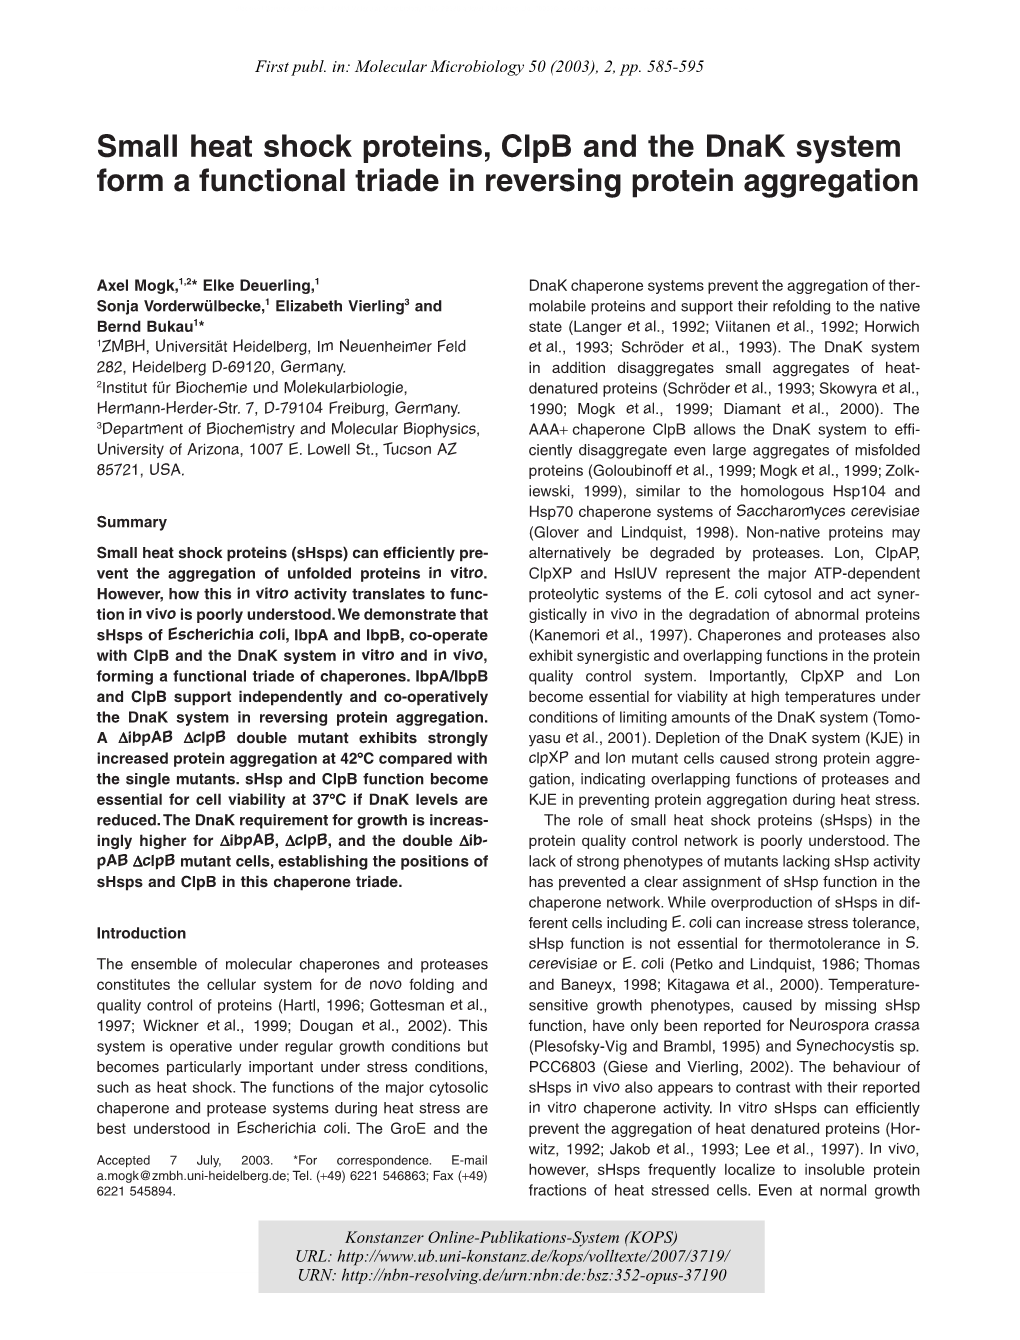 Small Heat Shock Proteins, Clpb and the Dnak System Form a Functional Triade in Reversing Protein Aggregation